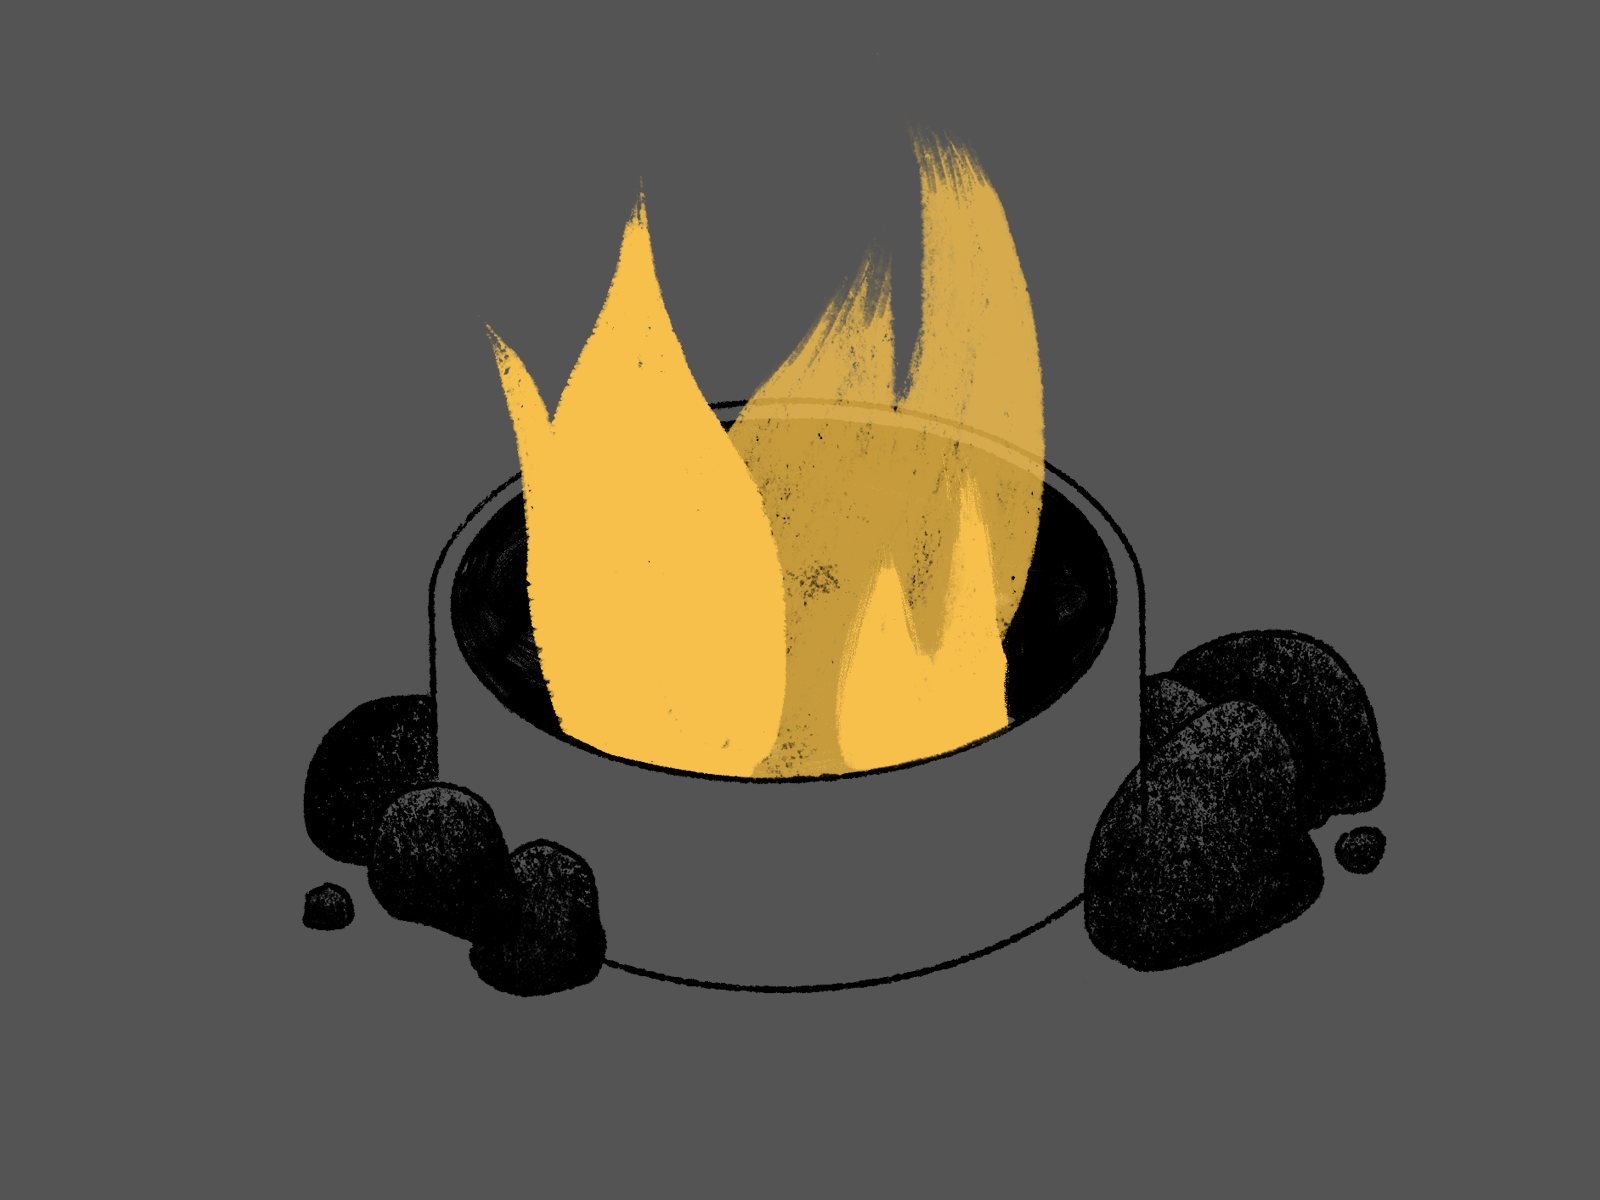 Build 2d animation 2danimation animation brush build campfire drawing fire flame flames flicker gif glow illustration illustrative ink inktober inktober2019 texture yellow